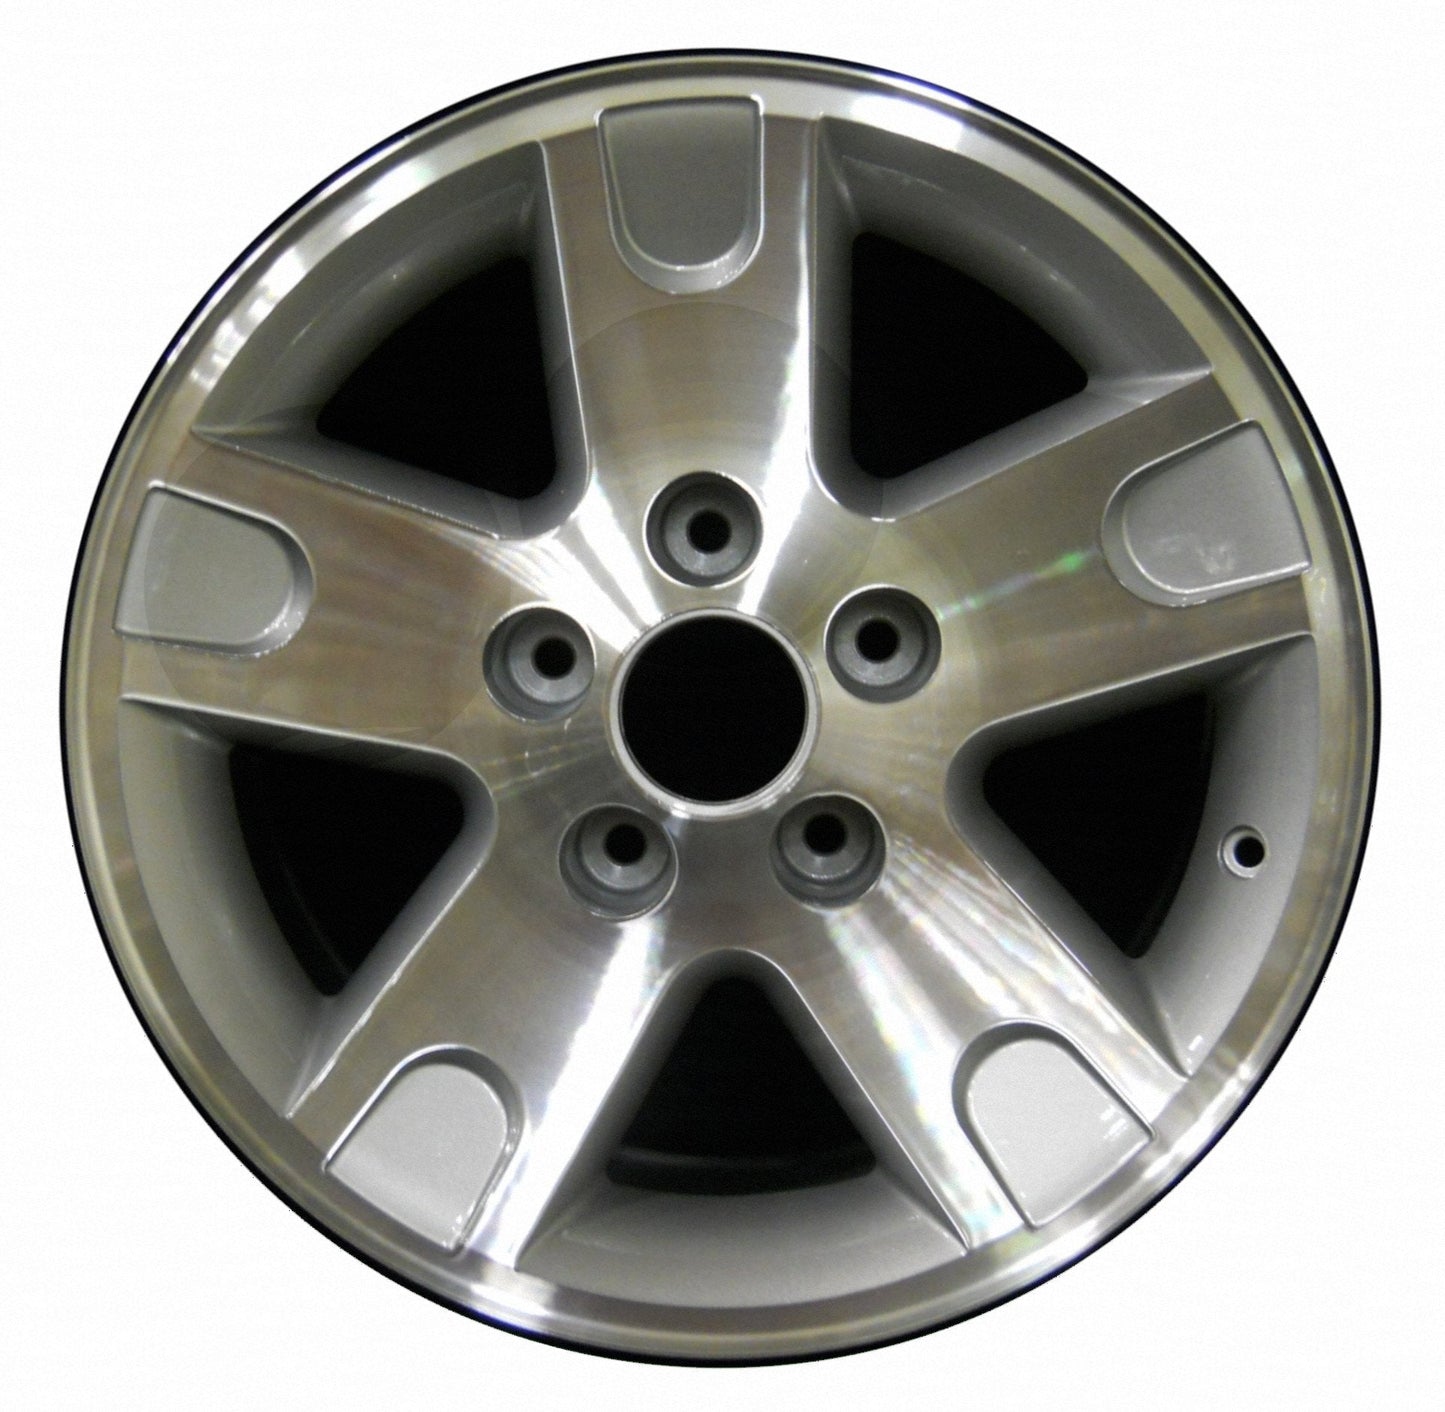 Ford F150 Truck  2002, 2003, 2004 Factory OEM Car Wheel Size 17x7.5 Alloy WAO.3466.PS01.MA